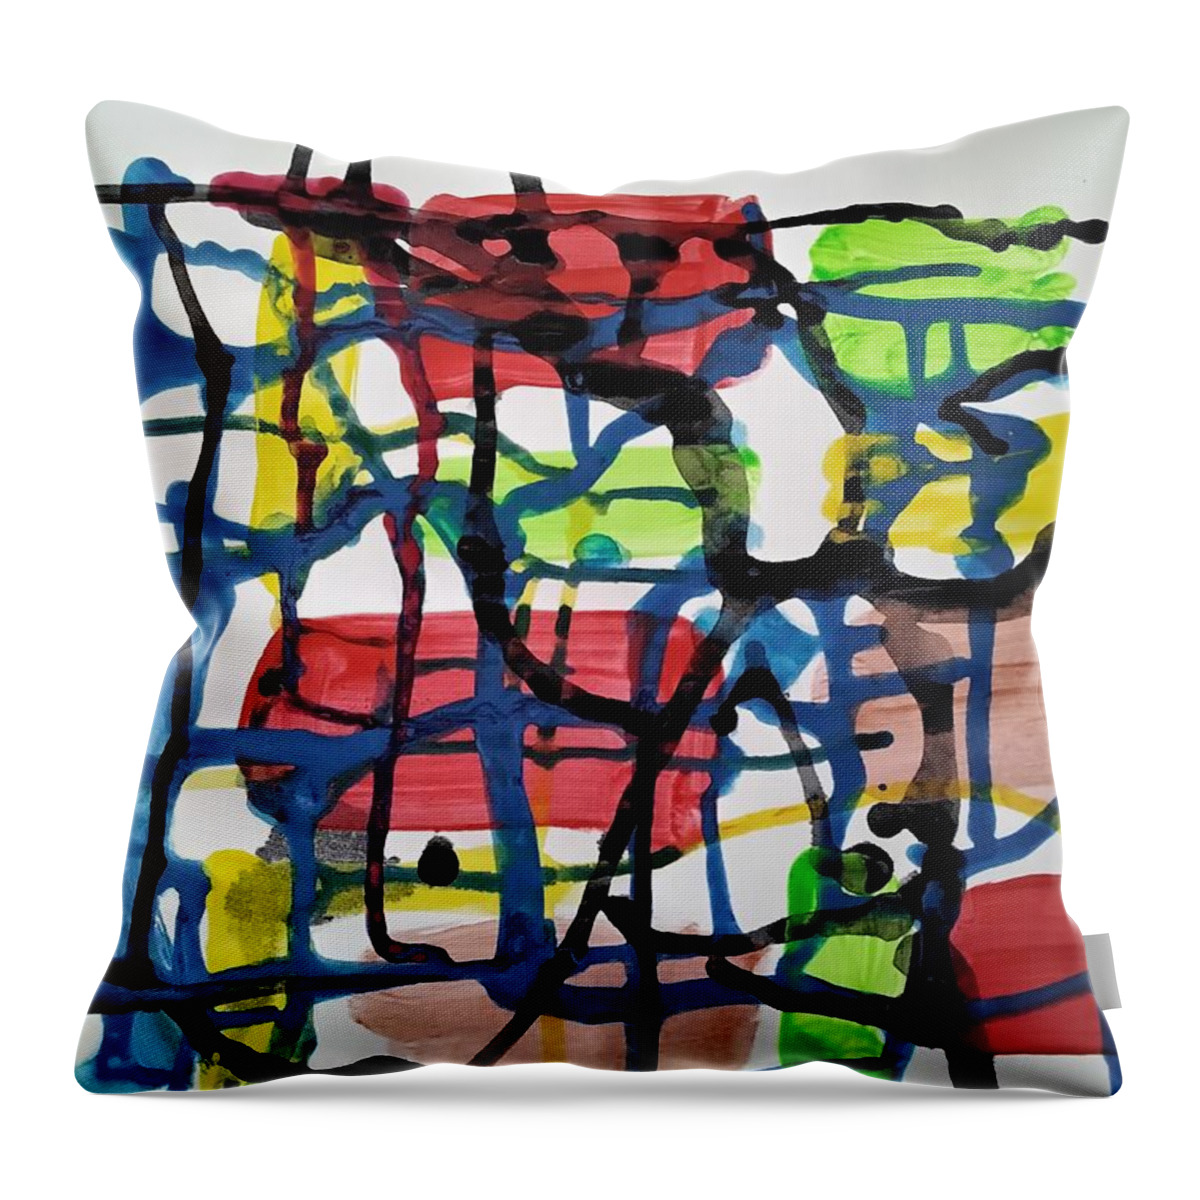  Throw Pillow featuring the painting Caos 19 by Giuseppe Monti